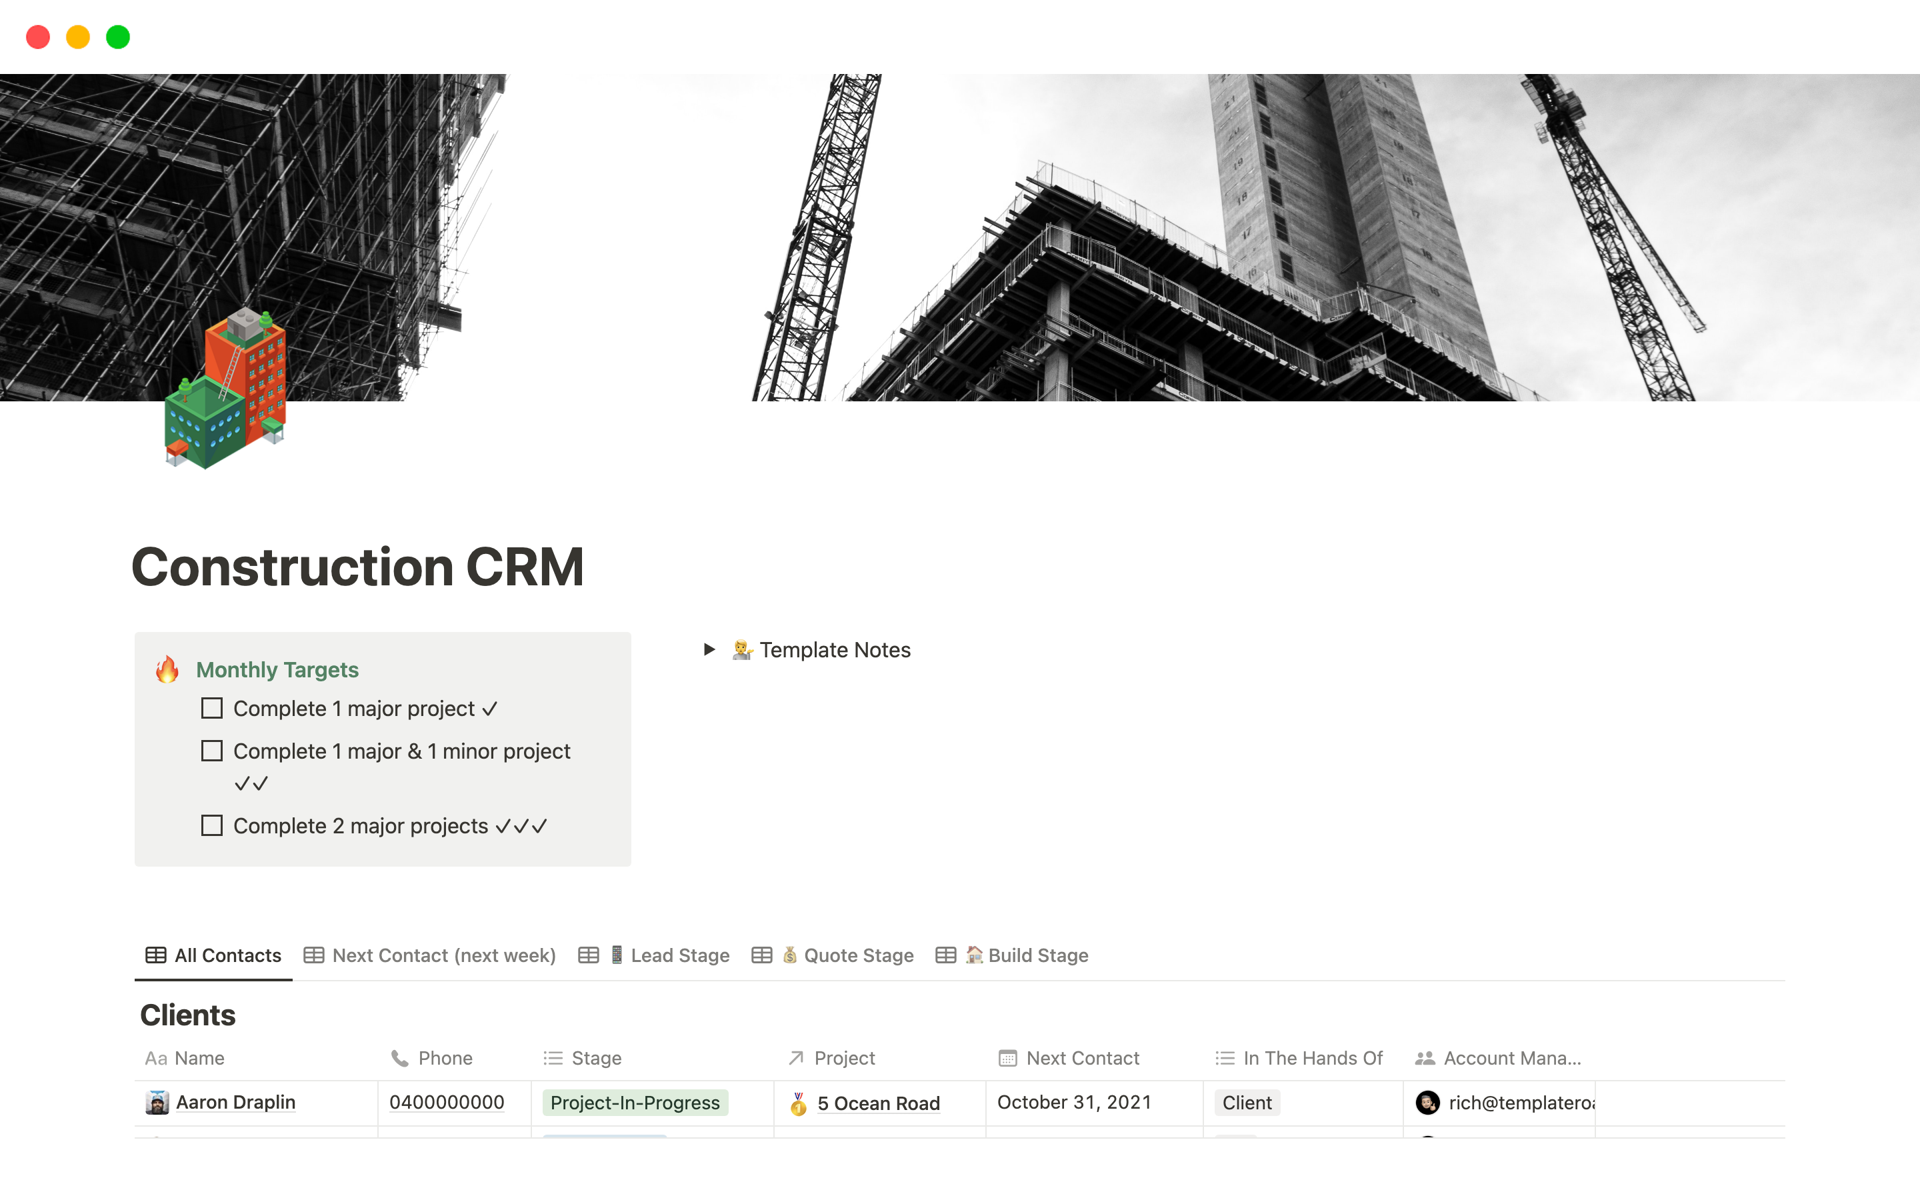 By using Notion to build your CRM, you can create the custom construction CRM that you need in your favourite tool.